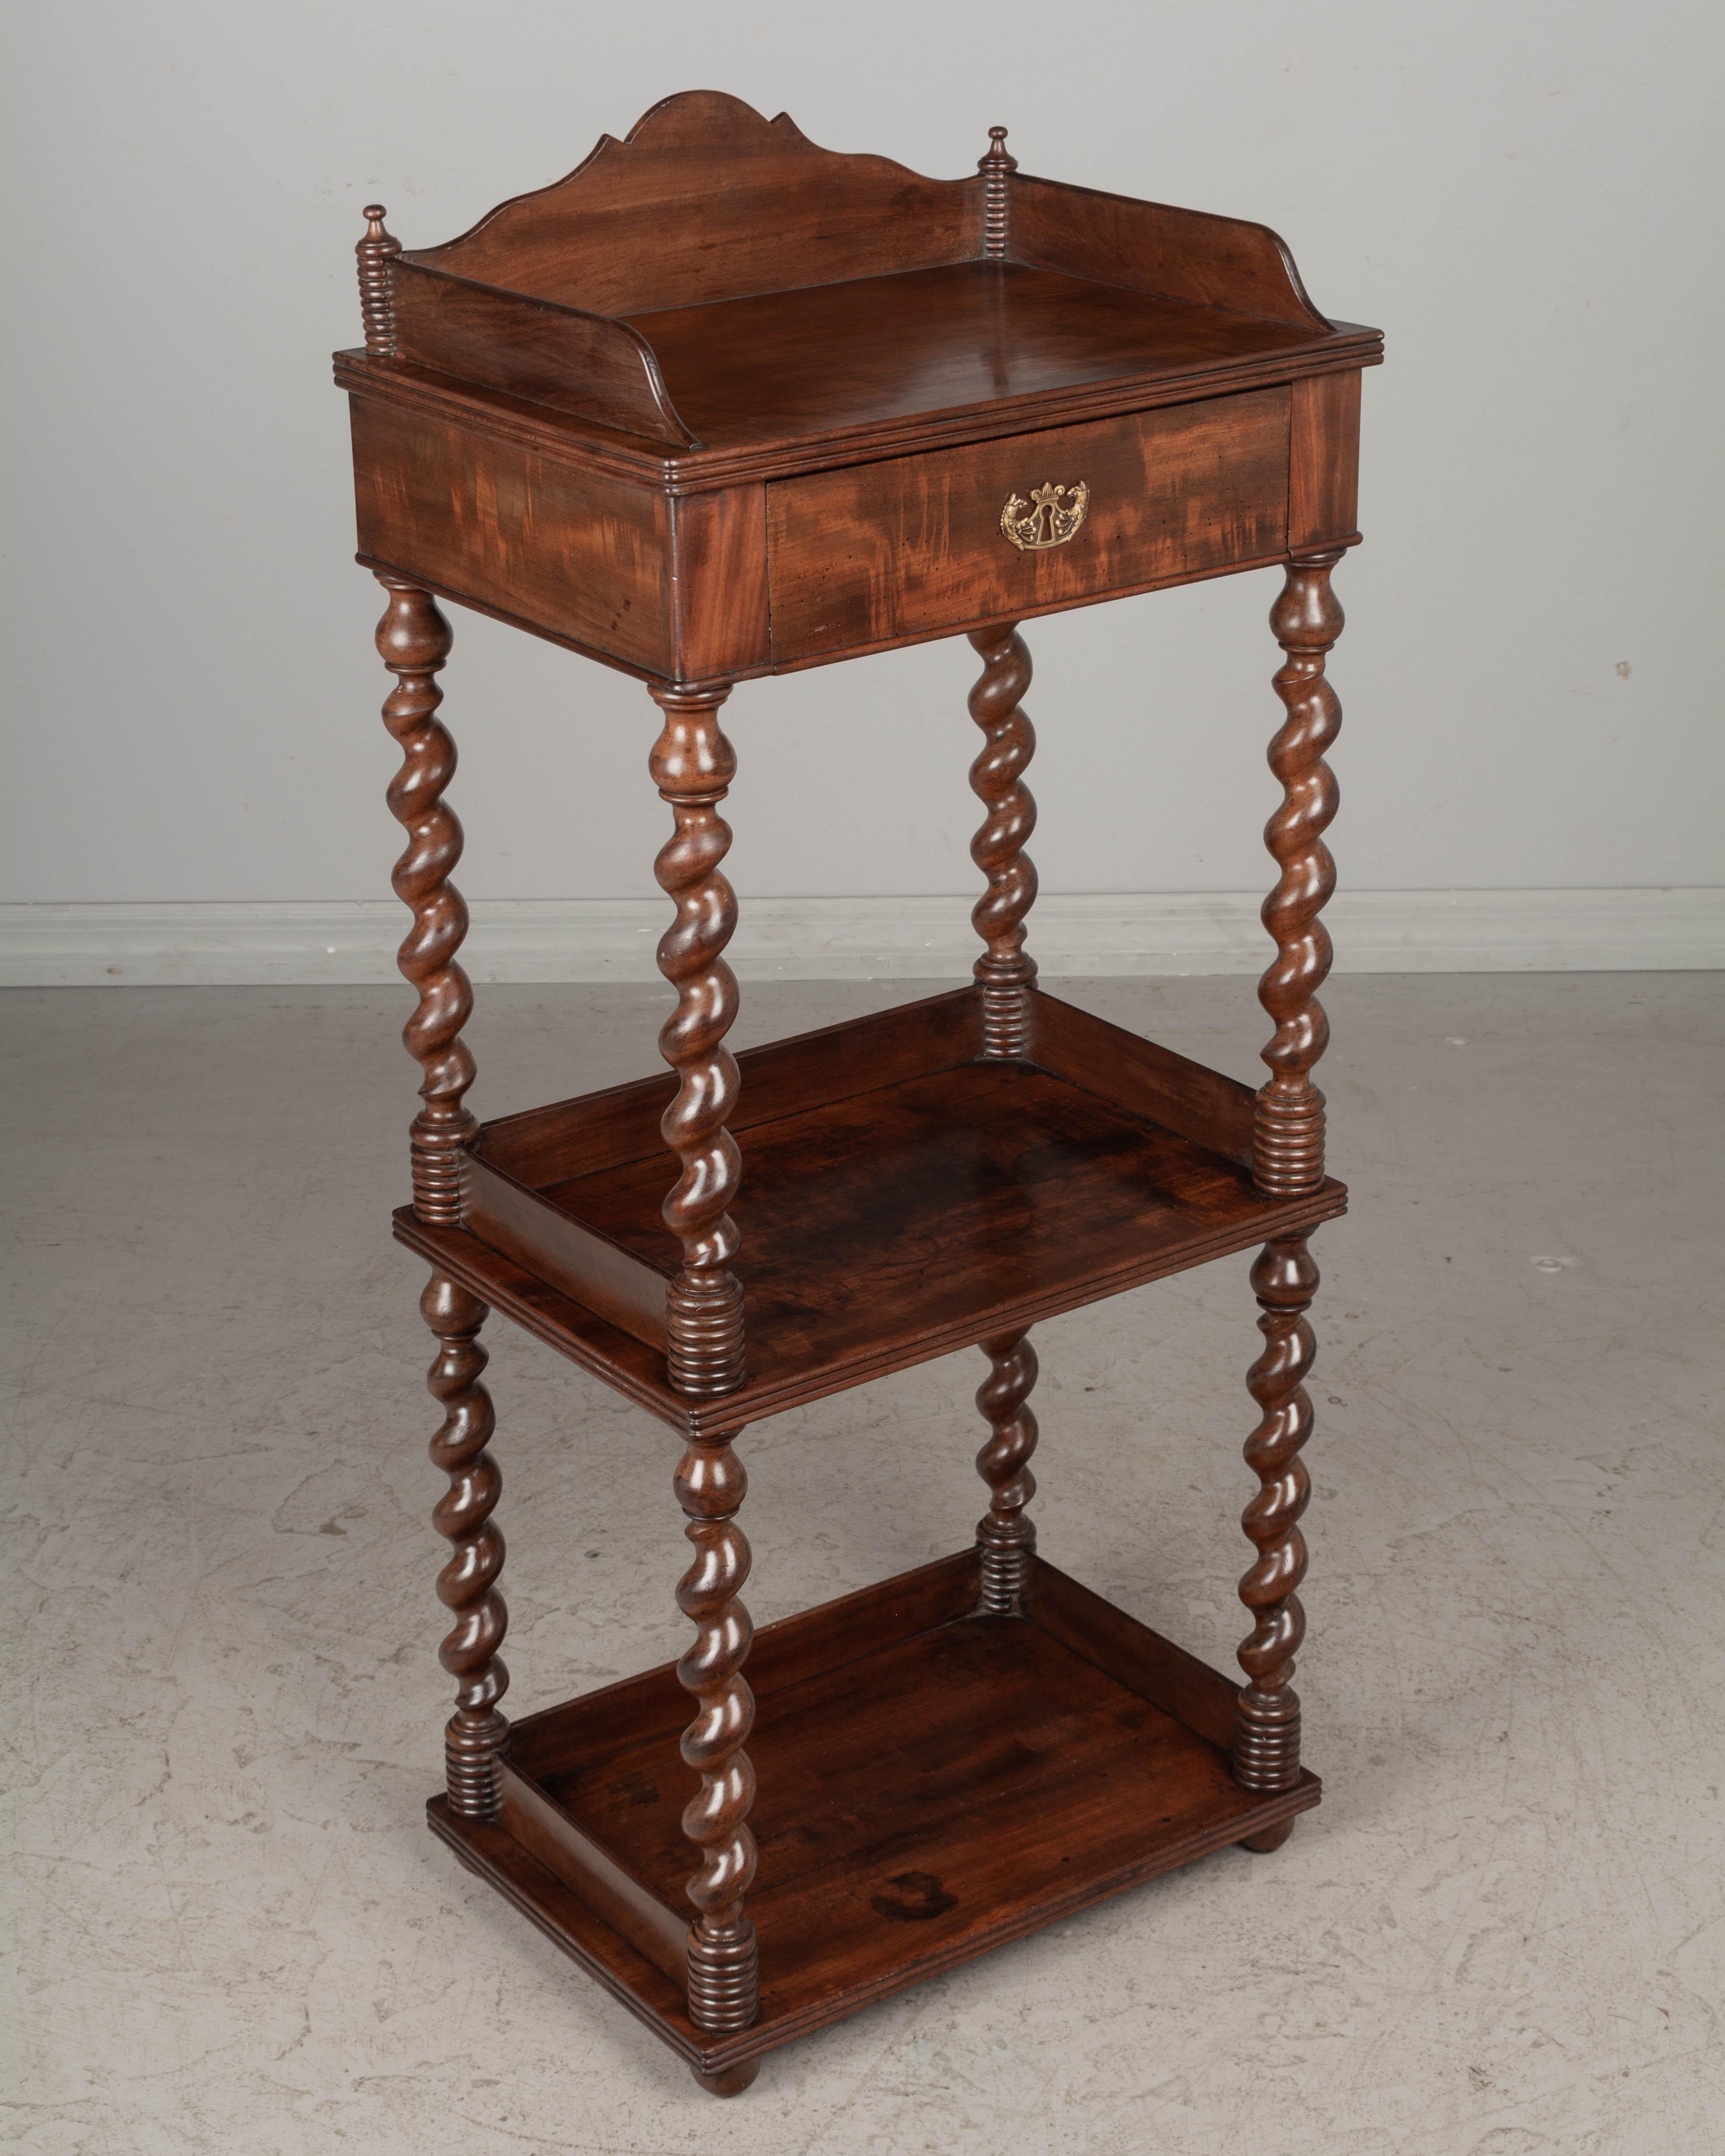 A 19th century French Louis Philippe étagère, or tiered stand, made of solid mahogany, finished on all sides and retaining a nice luster. Turned barley twist columns support the shelves Dovetail drawer at the top with flame mahogany veneer and